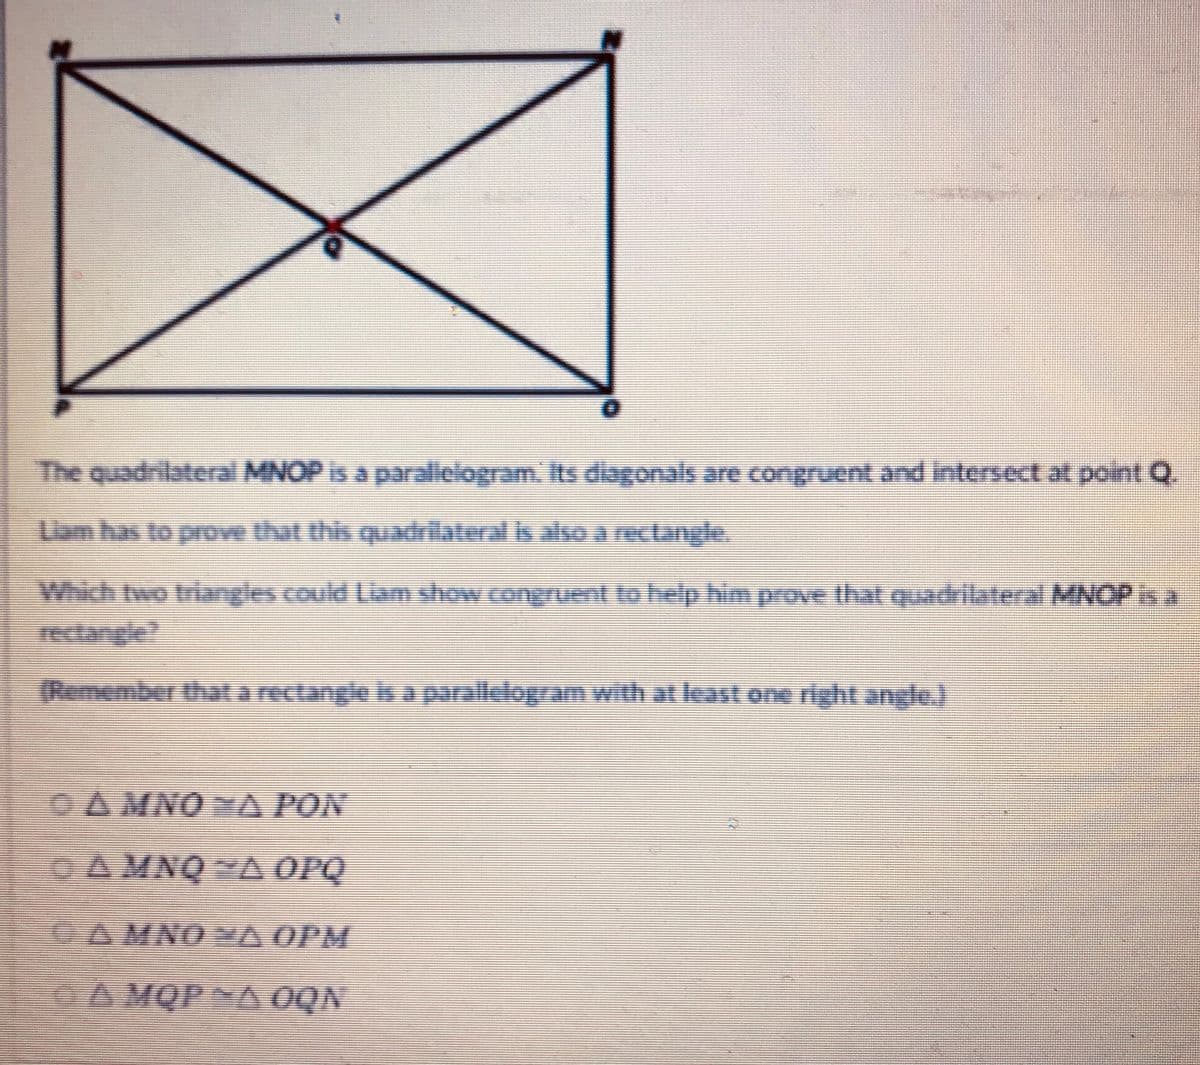 The quadrilateral MNOP is a paralielogram. Its diagonals are congruent and Intersect at point Q
Uam has to prove that this quadriateral is also a rectangle.
Which two triangles could Liam show congruent to help himprove that quadrilateral MNOP isa
rectangie?
(Remember thata rectangle is a parallelogram with at least on right angle.)
OA MNO A PON
GA MNQ YA OPQ
OA MNO YA OPM
GA MQPNA OQN
